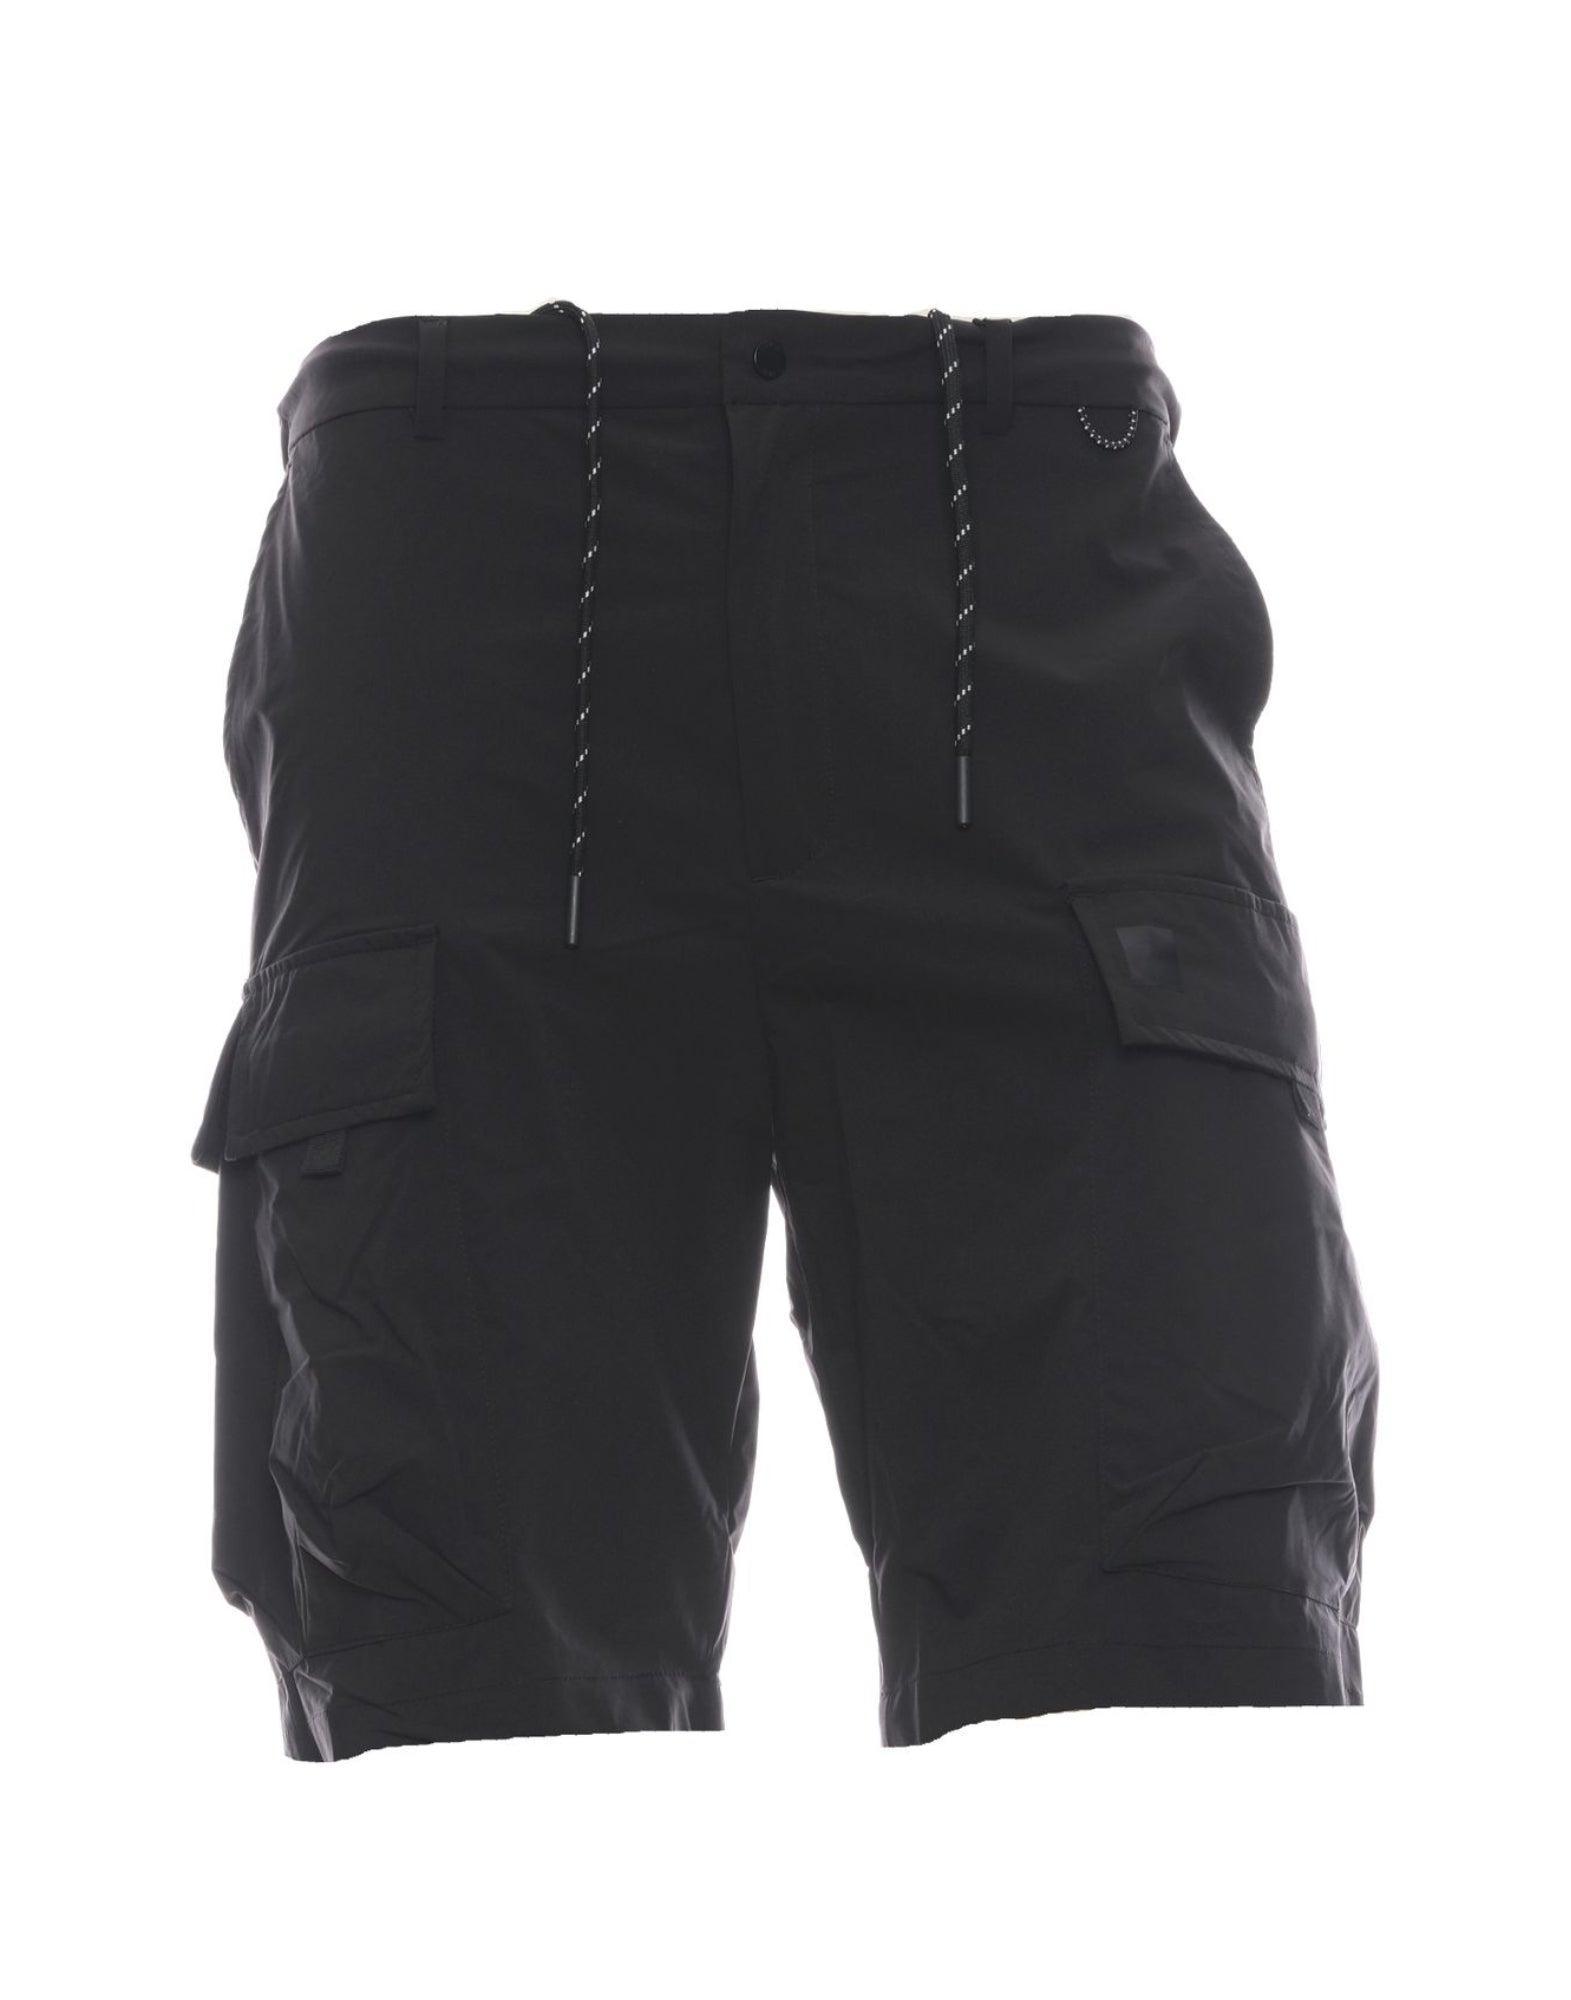 Shorts Man EOTM216AE42 Negro OUTHERE